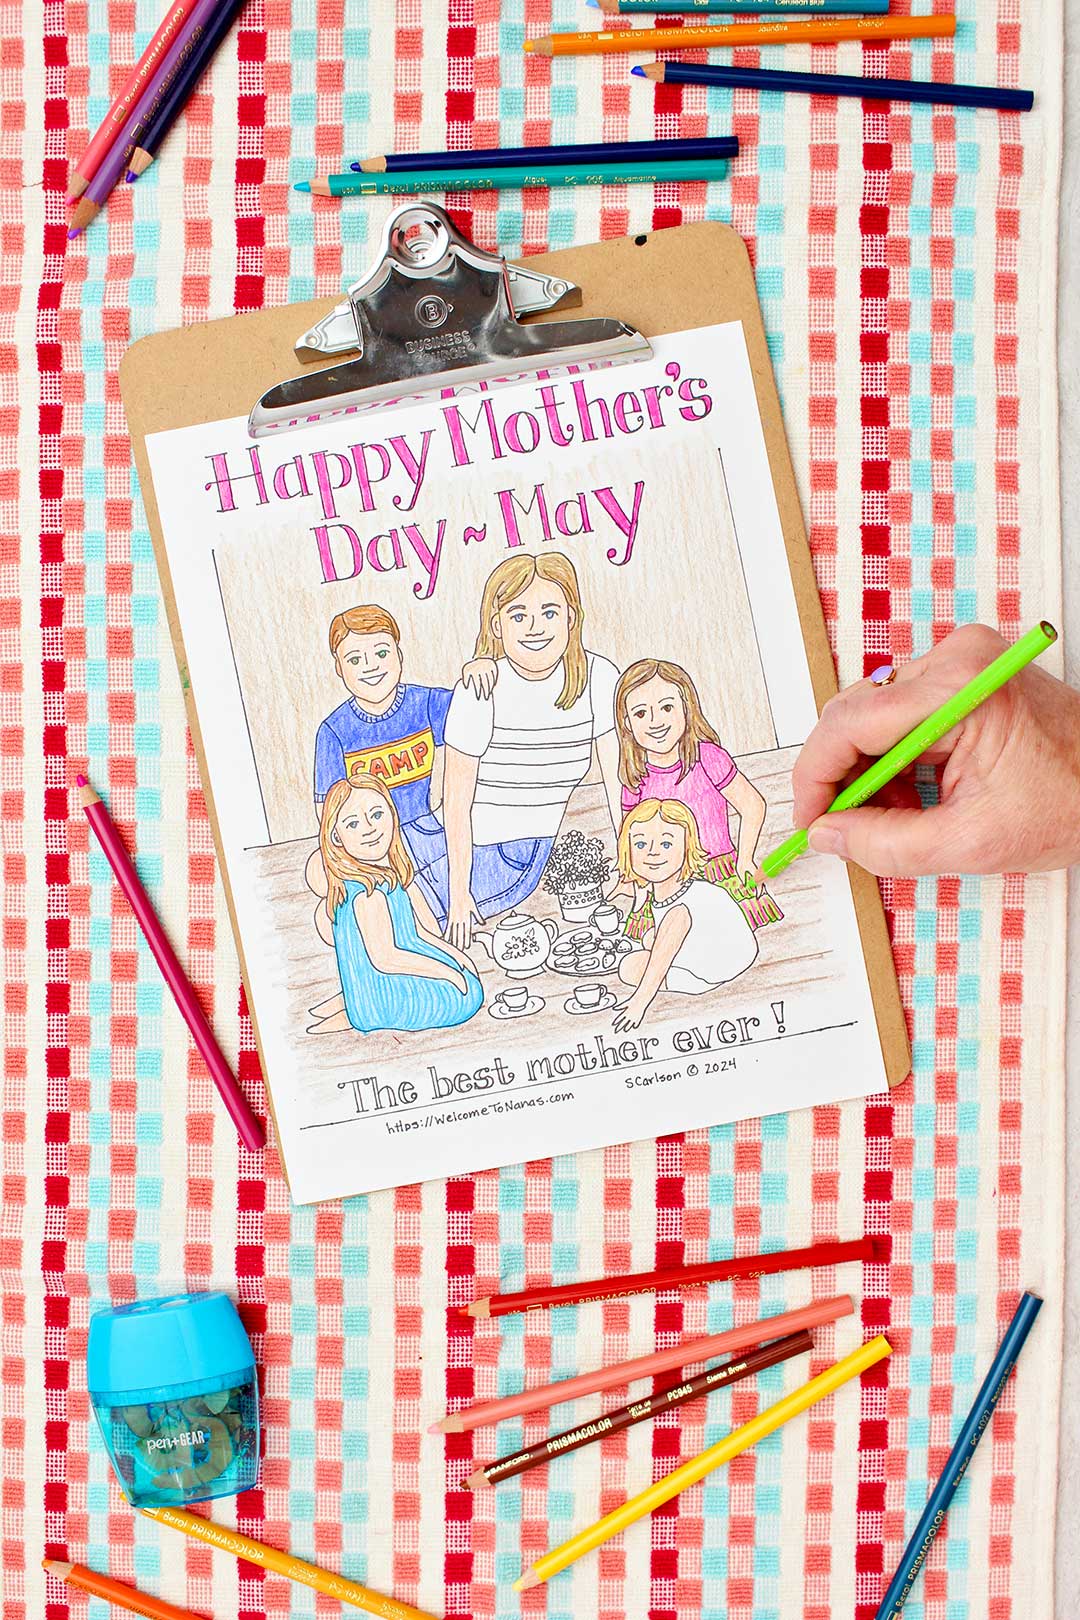 Hand coloring girl's dress green on Mother's Day Coloring page of a mom and kids having a tea party clipped into clip board and resting on a red, coral and aqua towel with colored pencils near by.